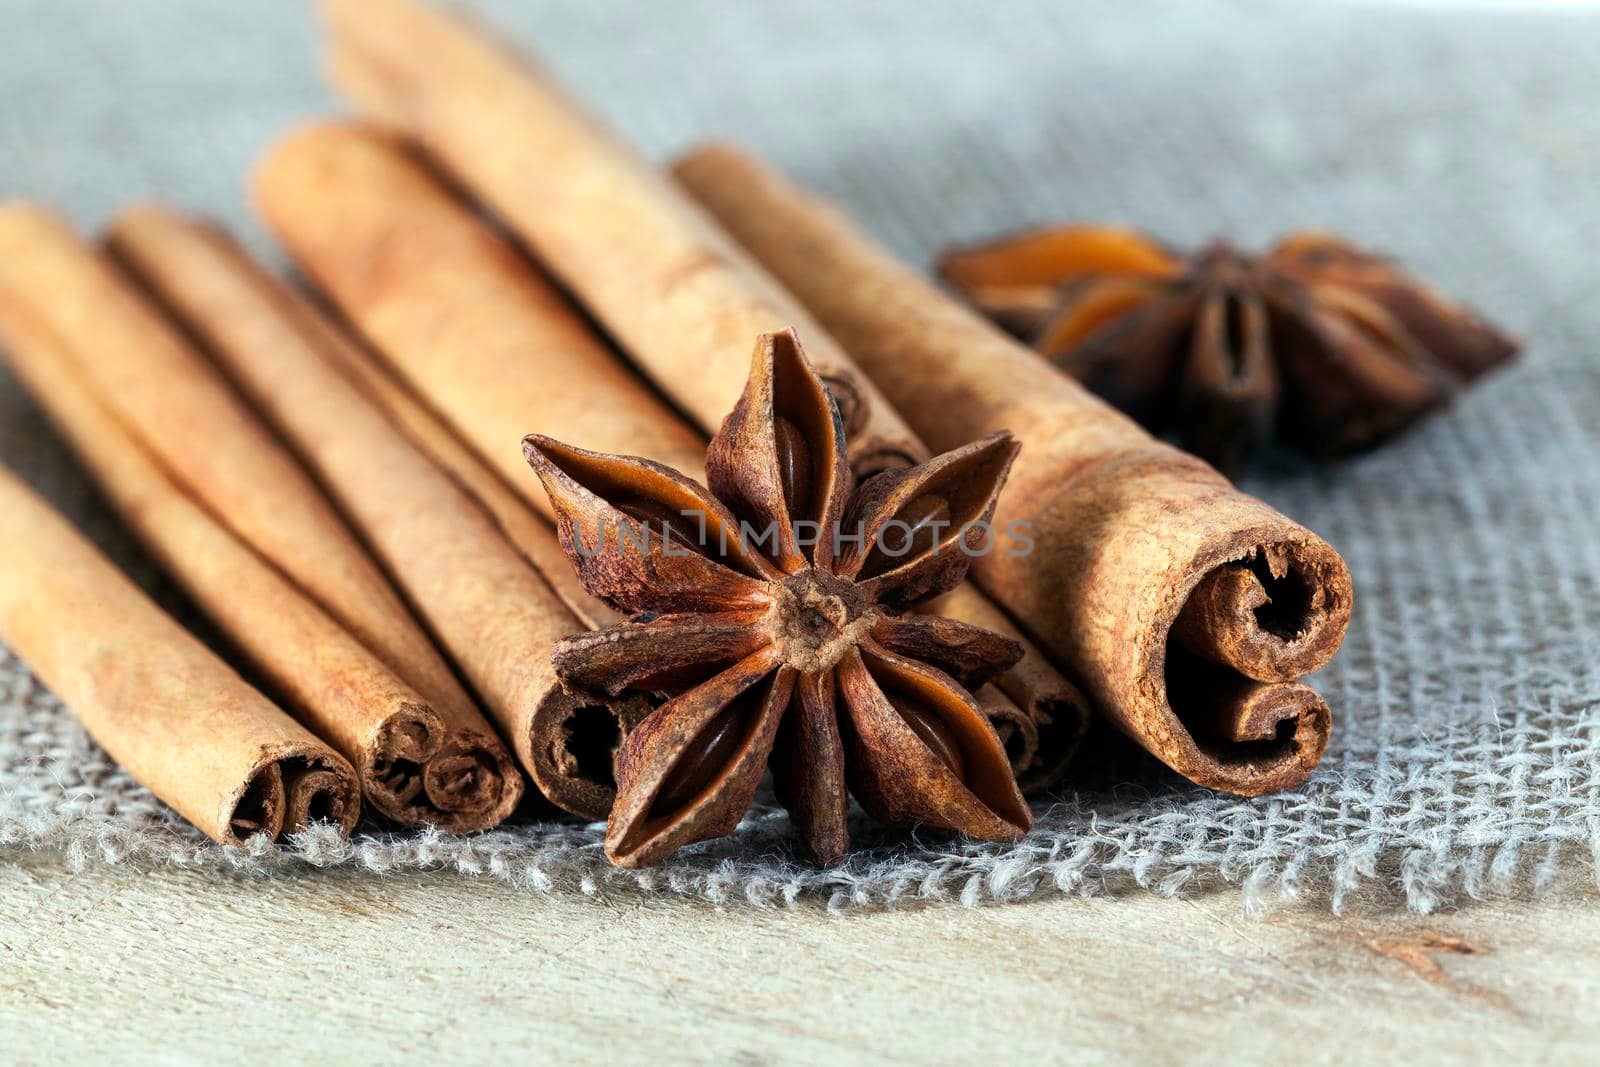 lying on a wooden board and linen tablecloth a few fragrant cinnamon sticks and anise stars, used as spices in cooking, close-up